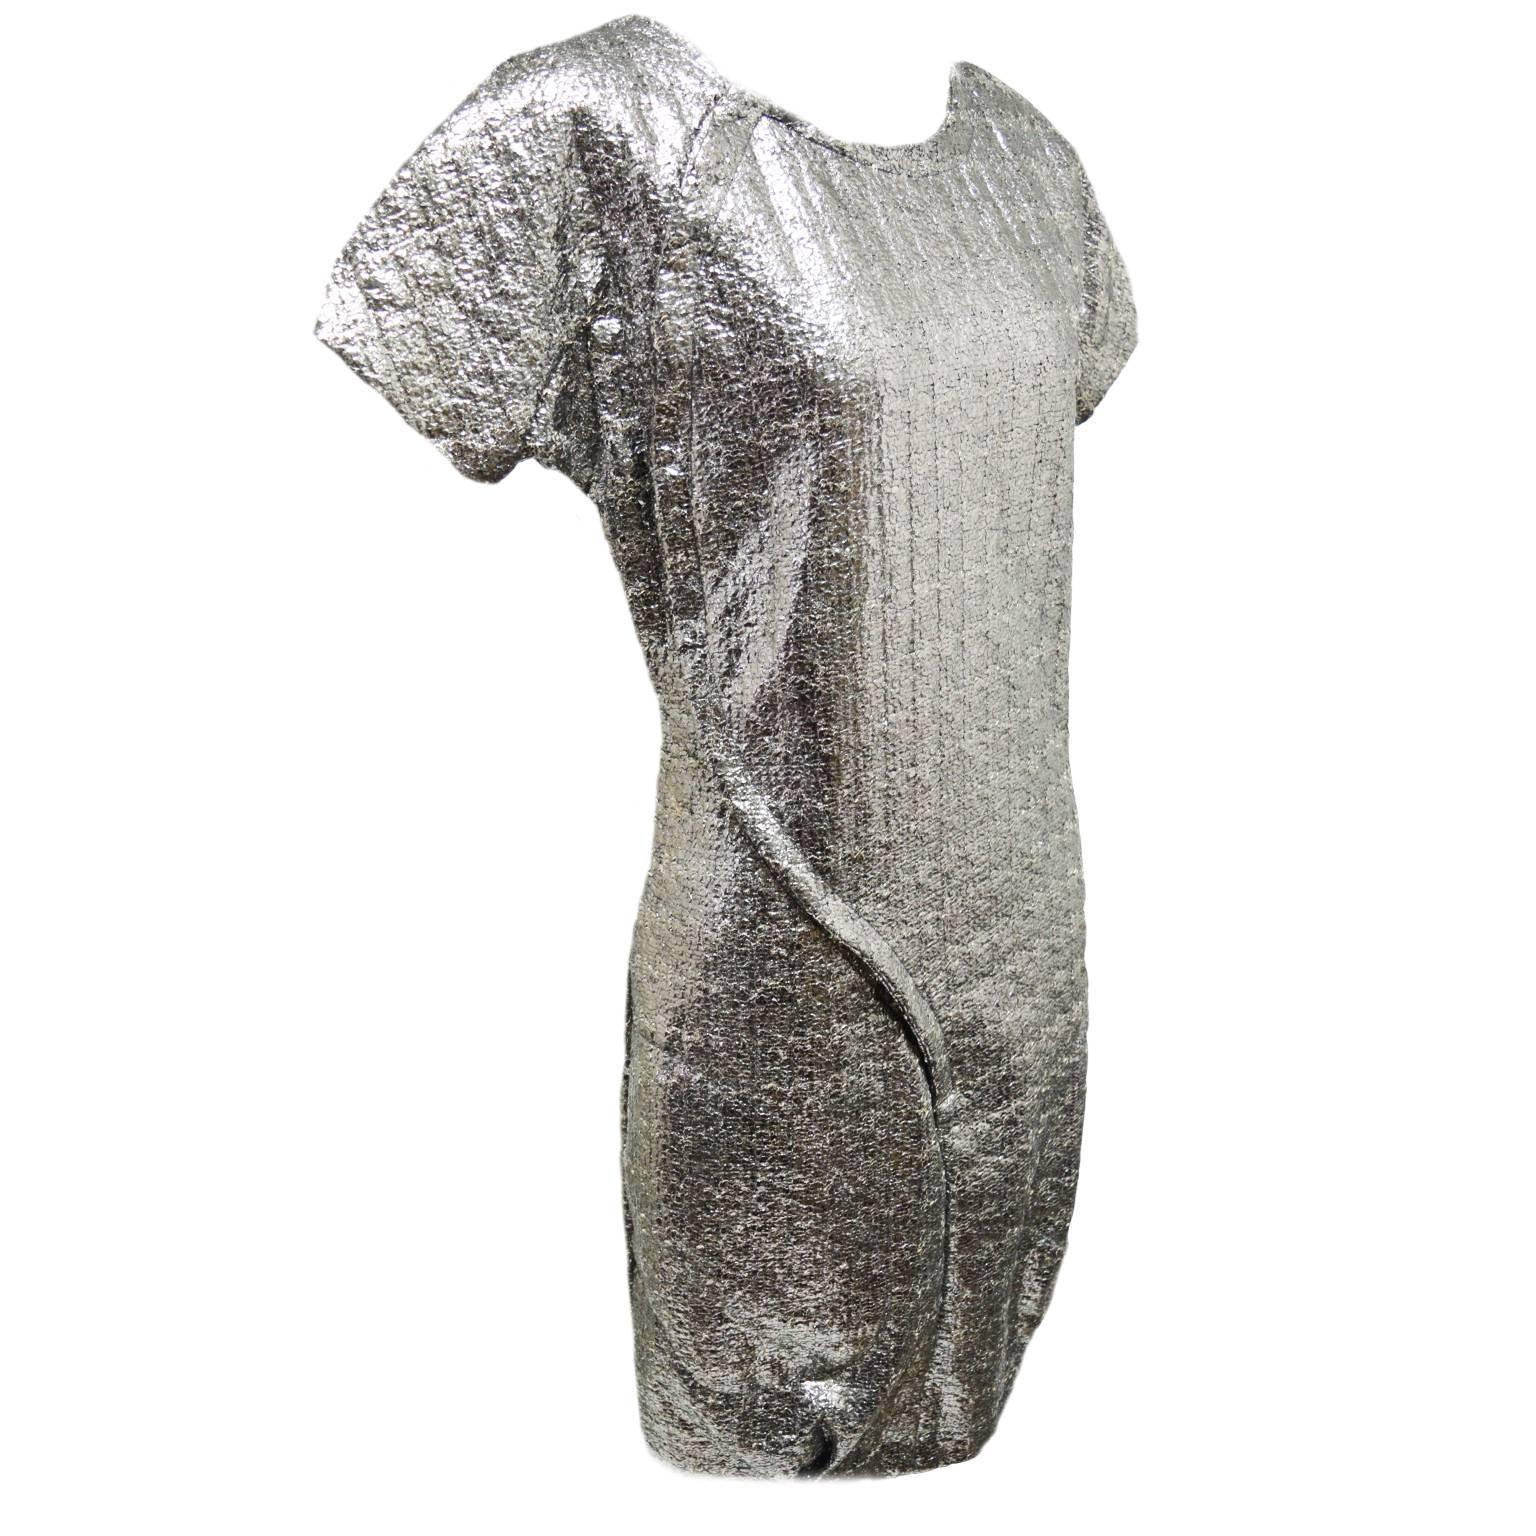 This Brian Reyes dress is a one of a kind. The dress is made out of a two faced fabric that has a soft inner hand and a metallic crinkled like texture creating this whole amazing aesthetic. The front of the dress has a snap opening and is alined to